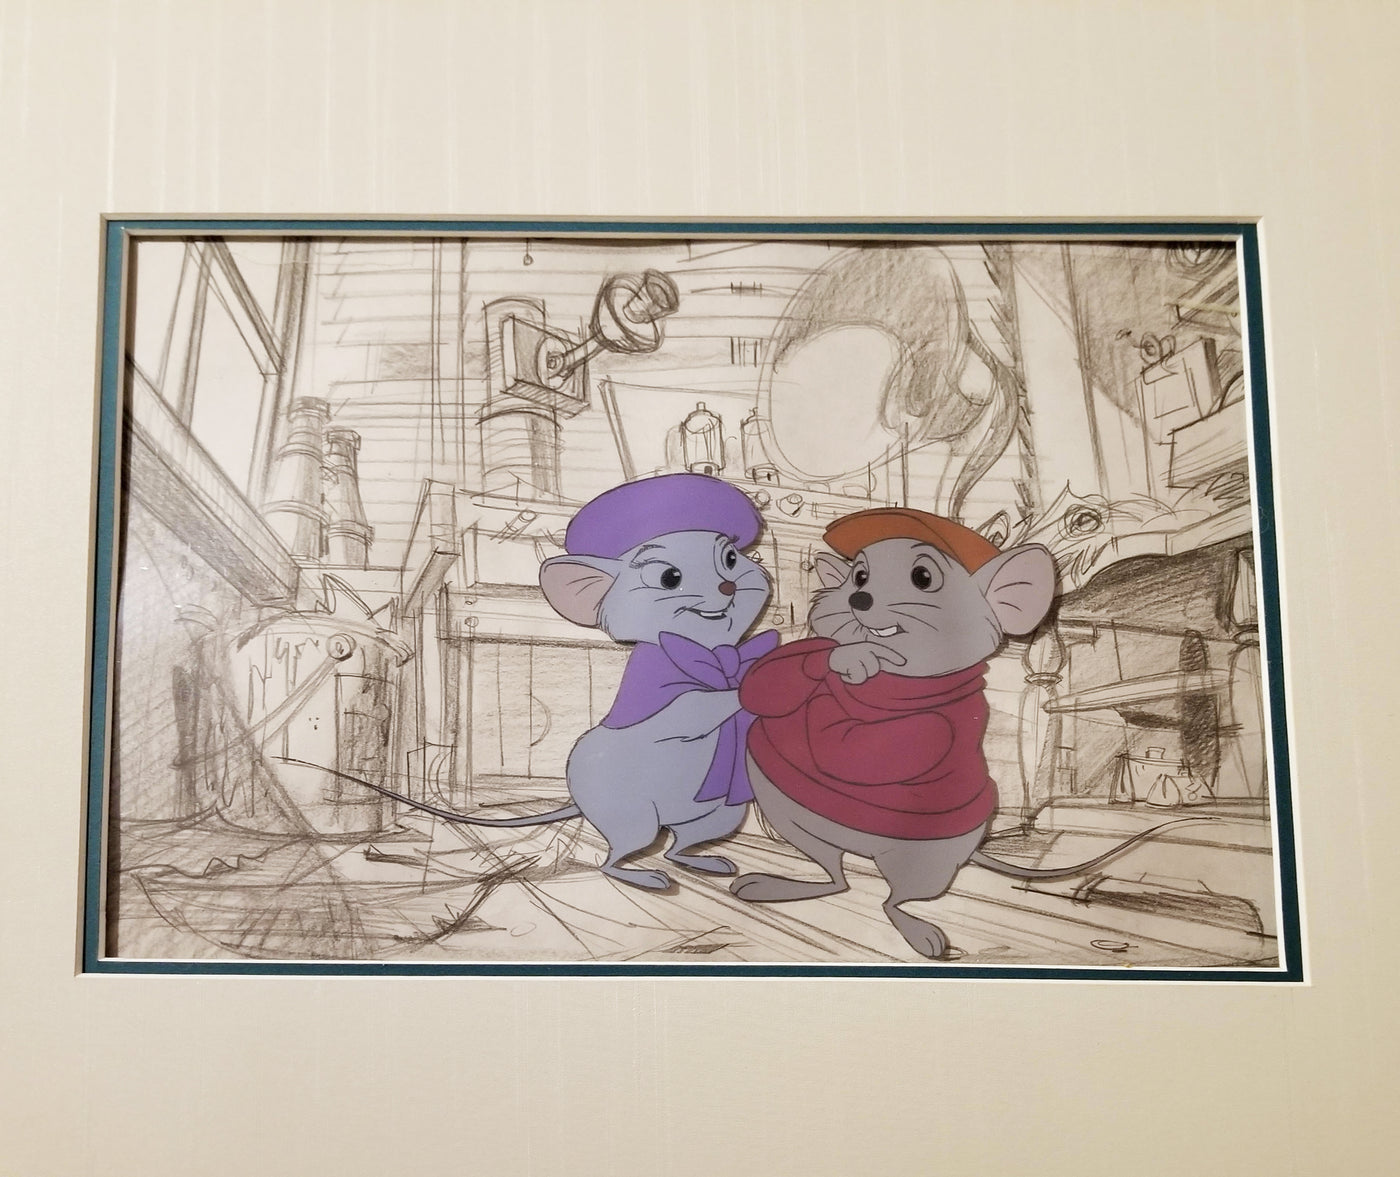 Original Walt Disney Production Cel on Original Production Layout Drawing from The Rescuers featuring Miss Bianca and Bernard